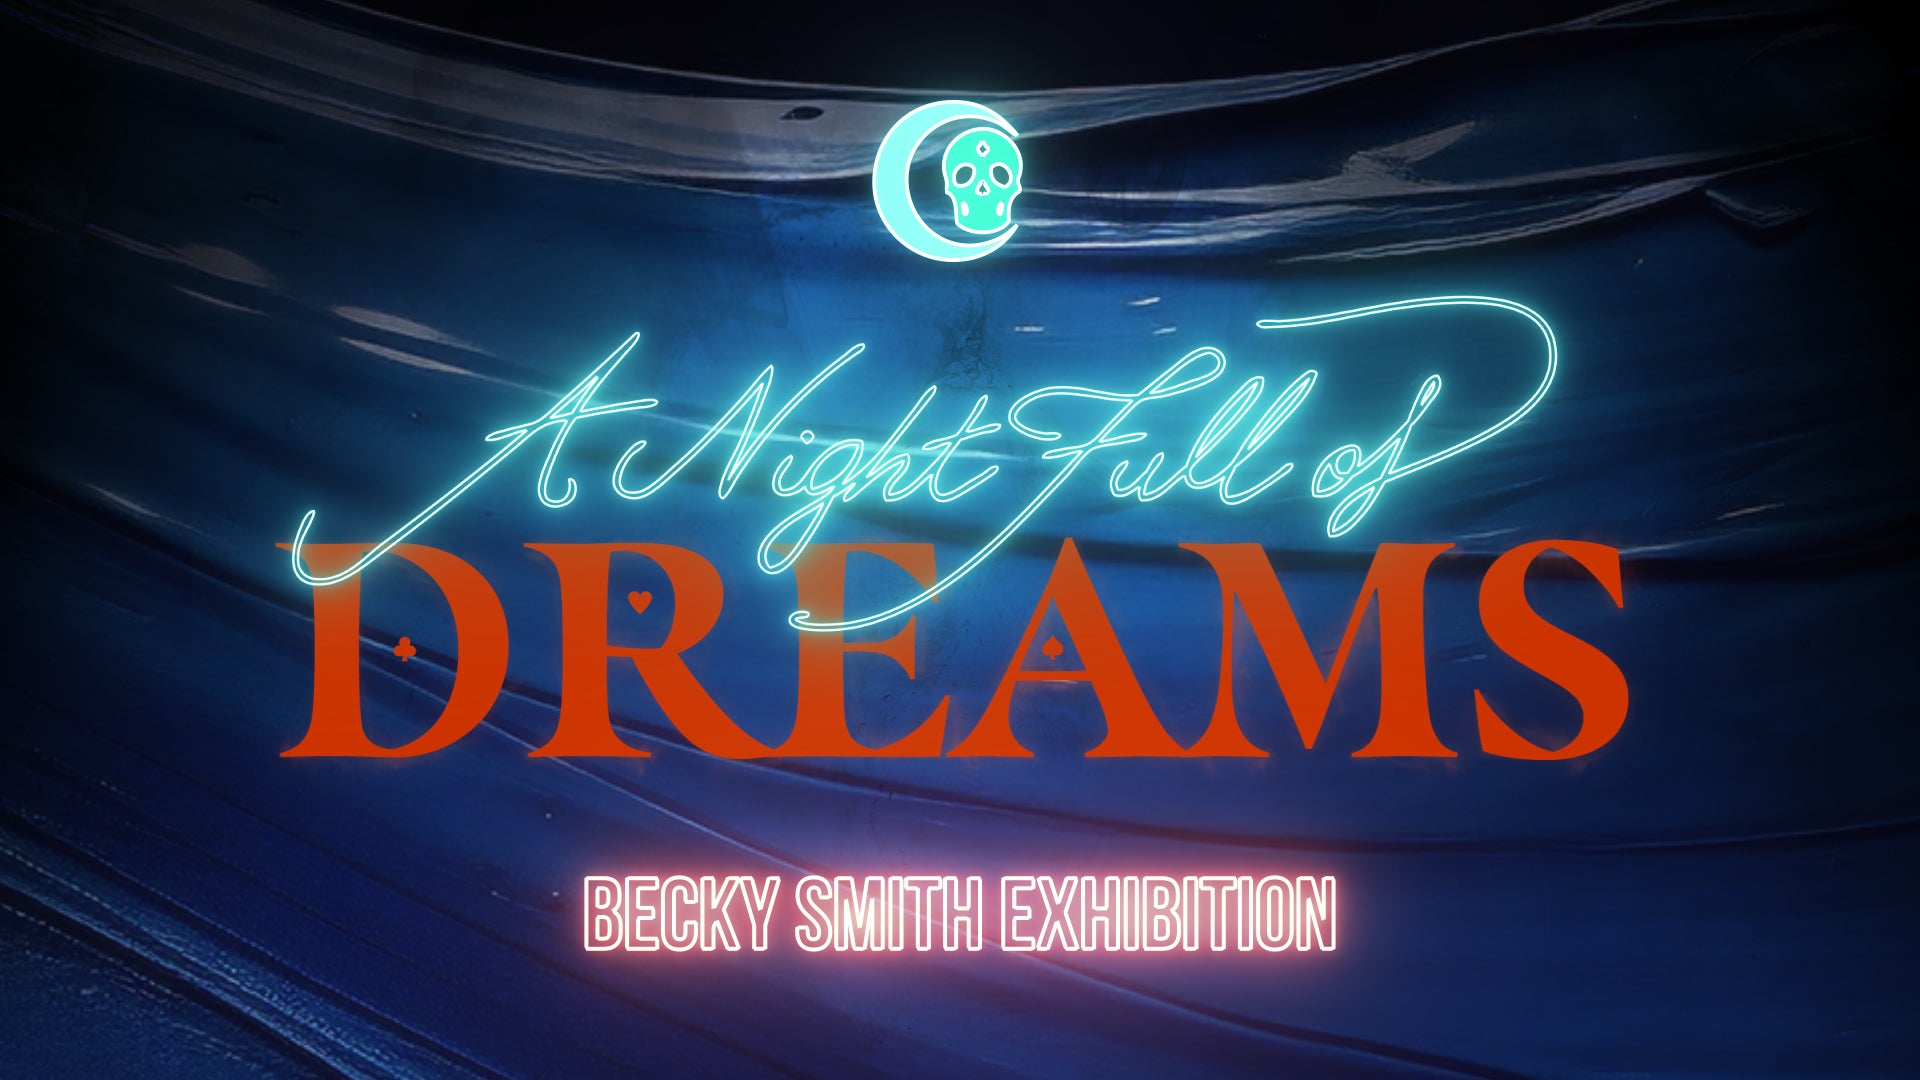 A Night Full Of Dreams - Becky Smith Solo Exhibition